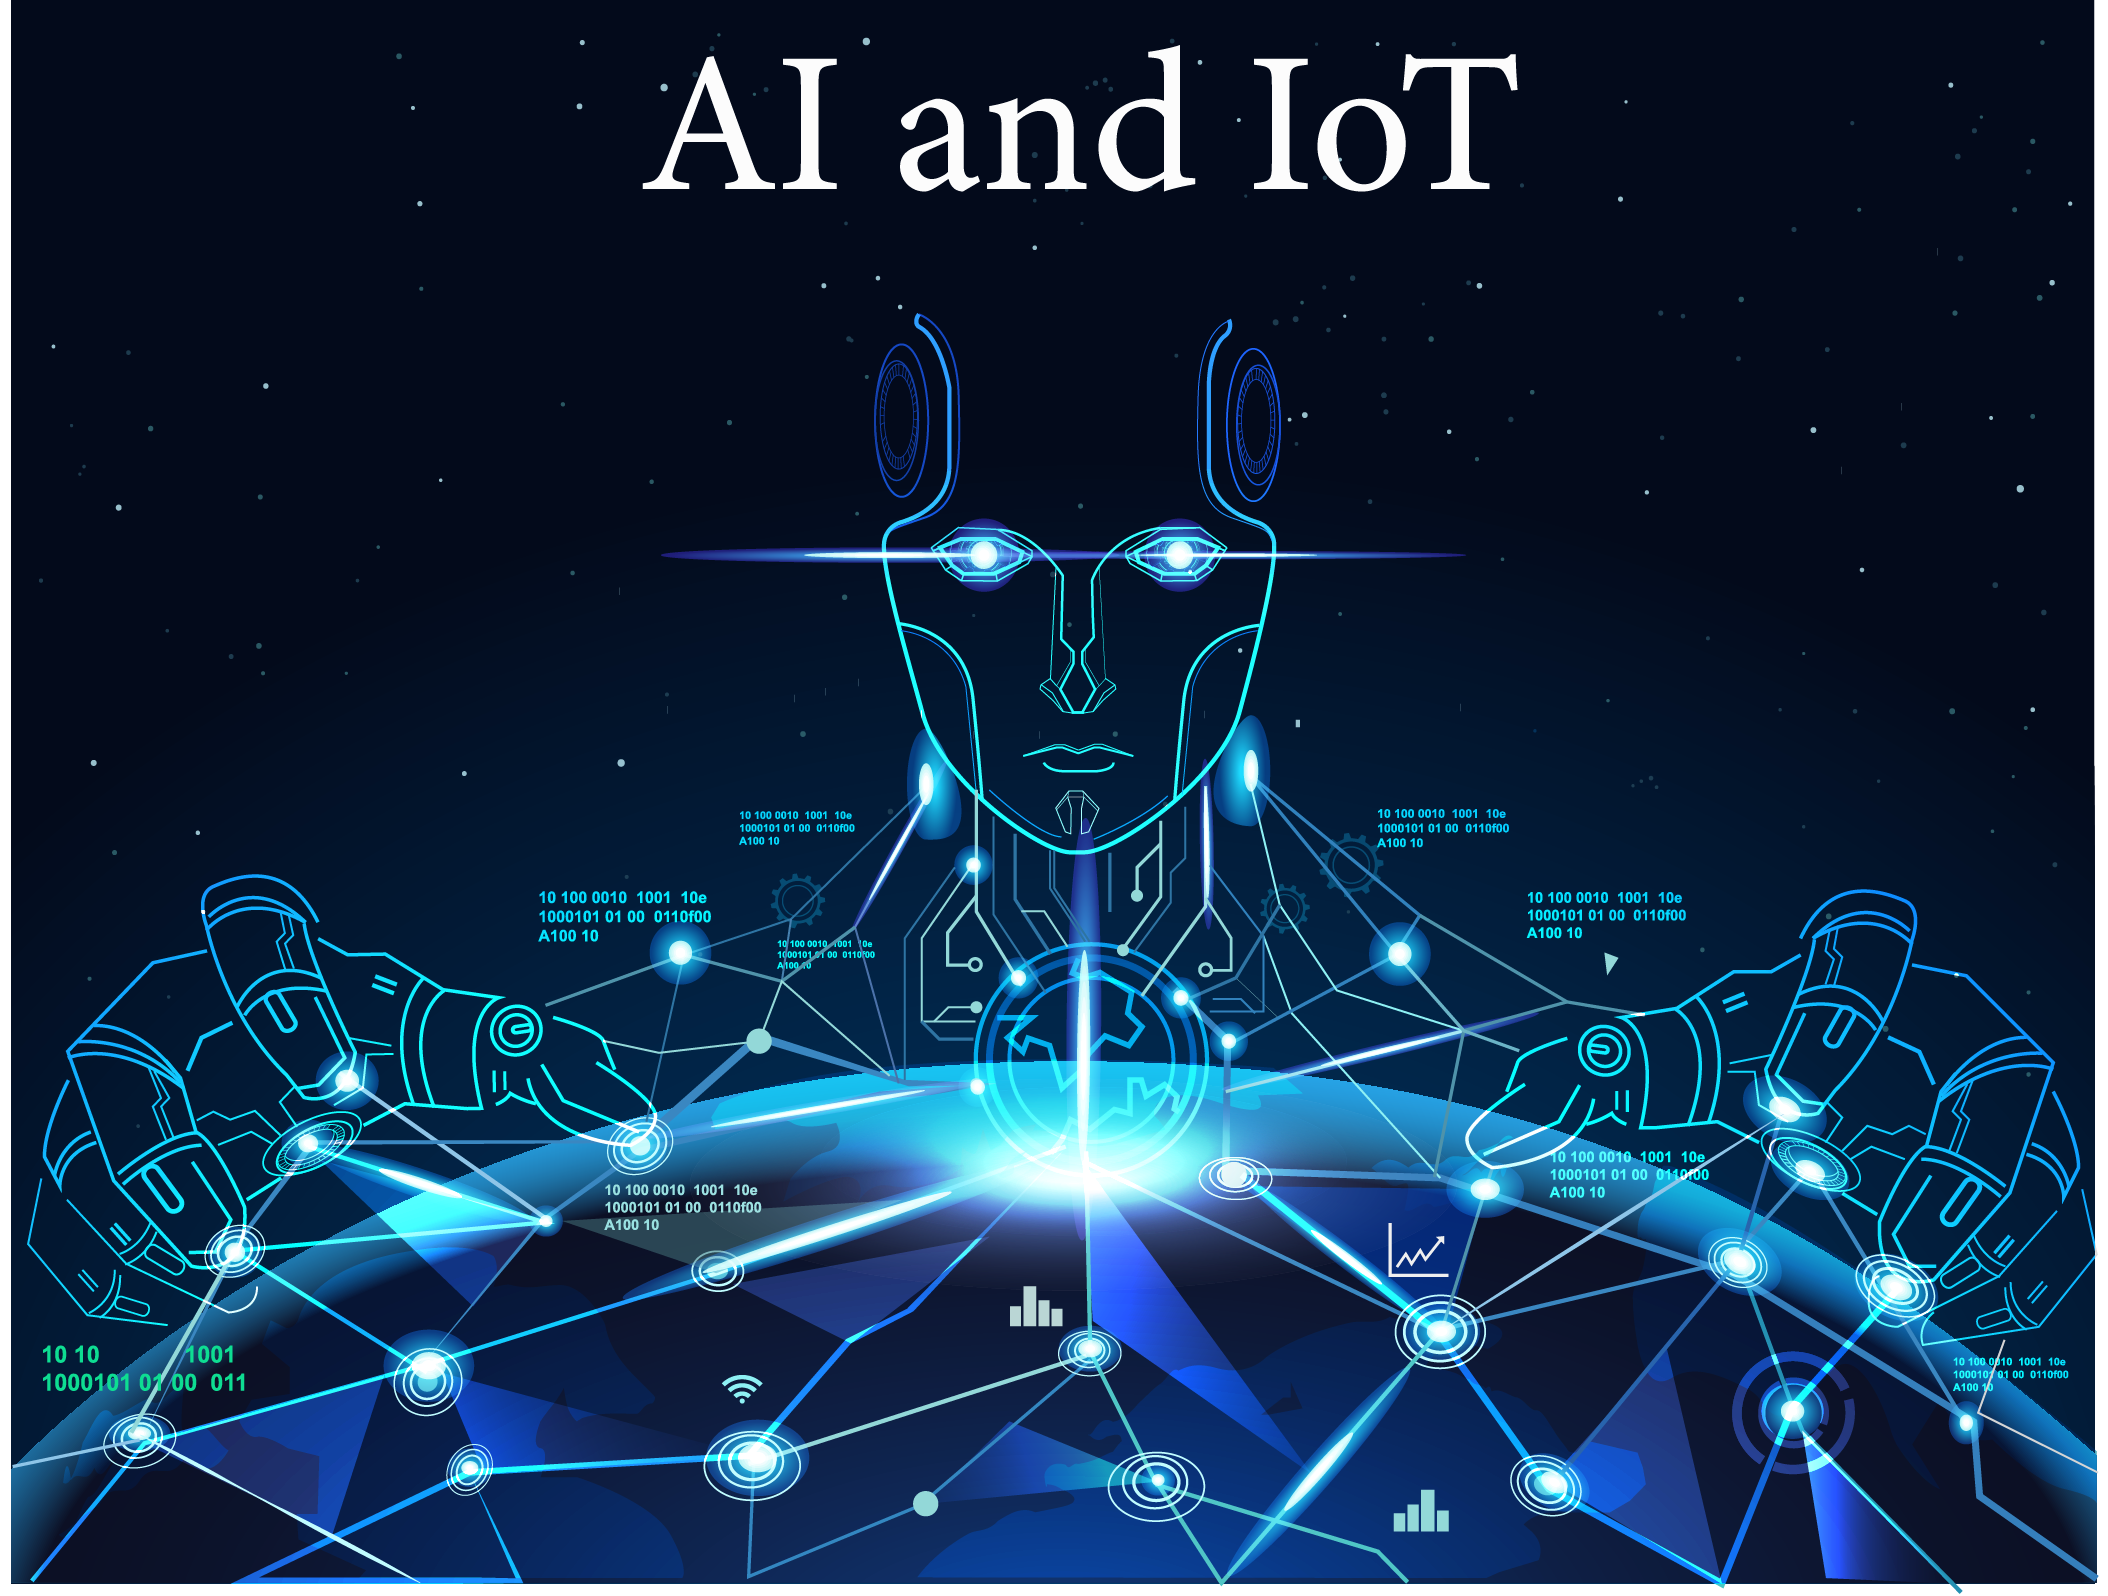 AI, Technology, IoT, machine learning, connected devices, smart homes